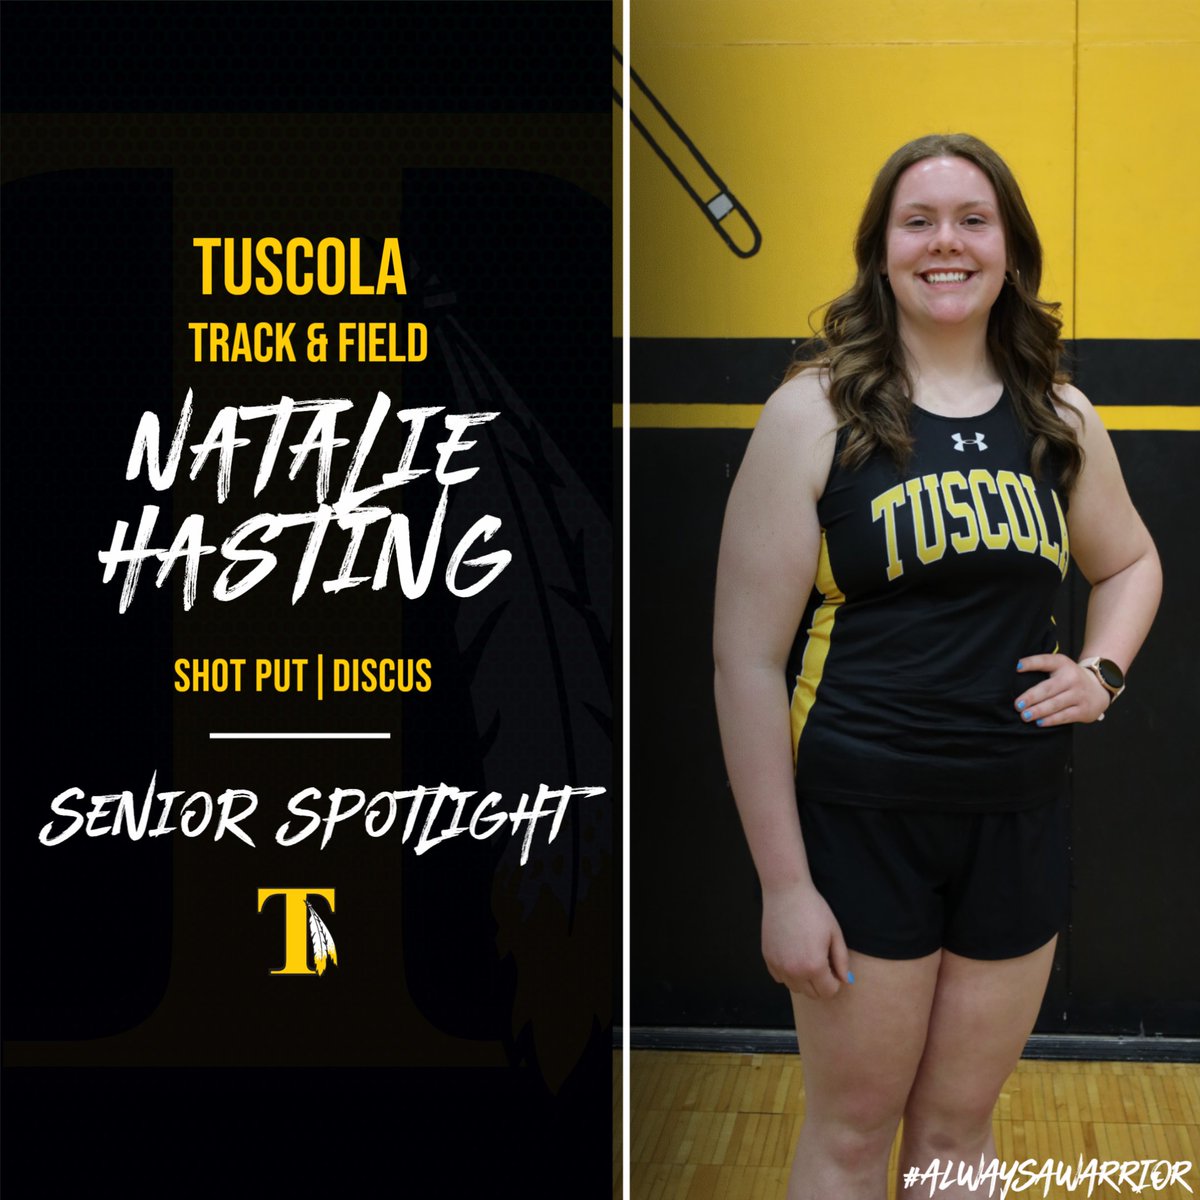 We would like to congratulate Natalie Hasting, Senior  Track & Field athlete, on an outstanding career at TCHS and wish her the best of luck!  #SeniorSpotlight #alwaysawarrior